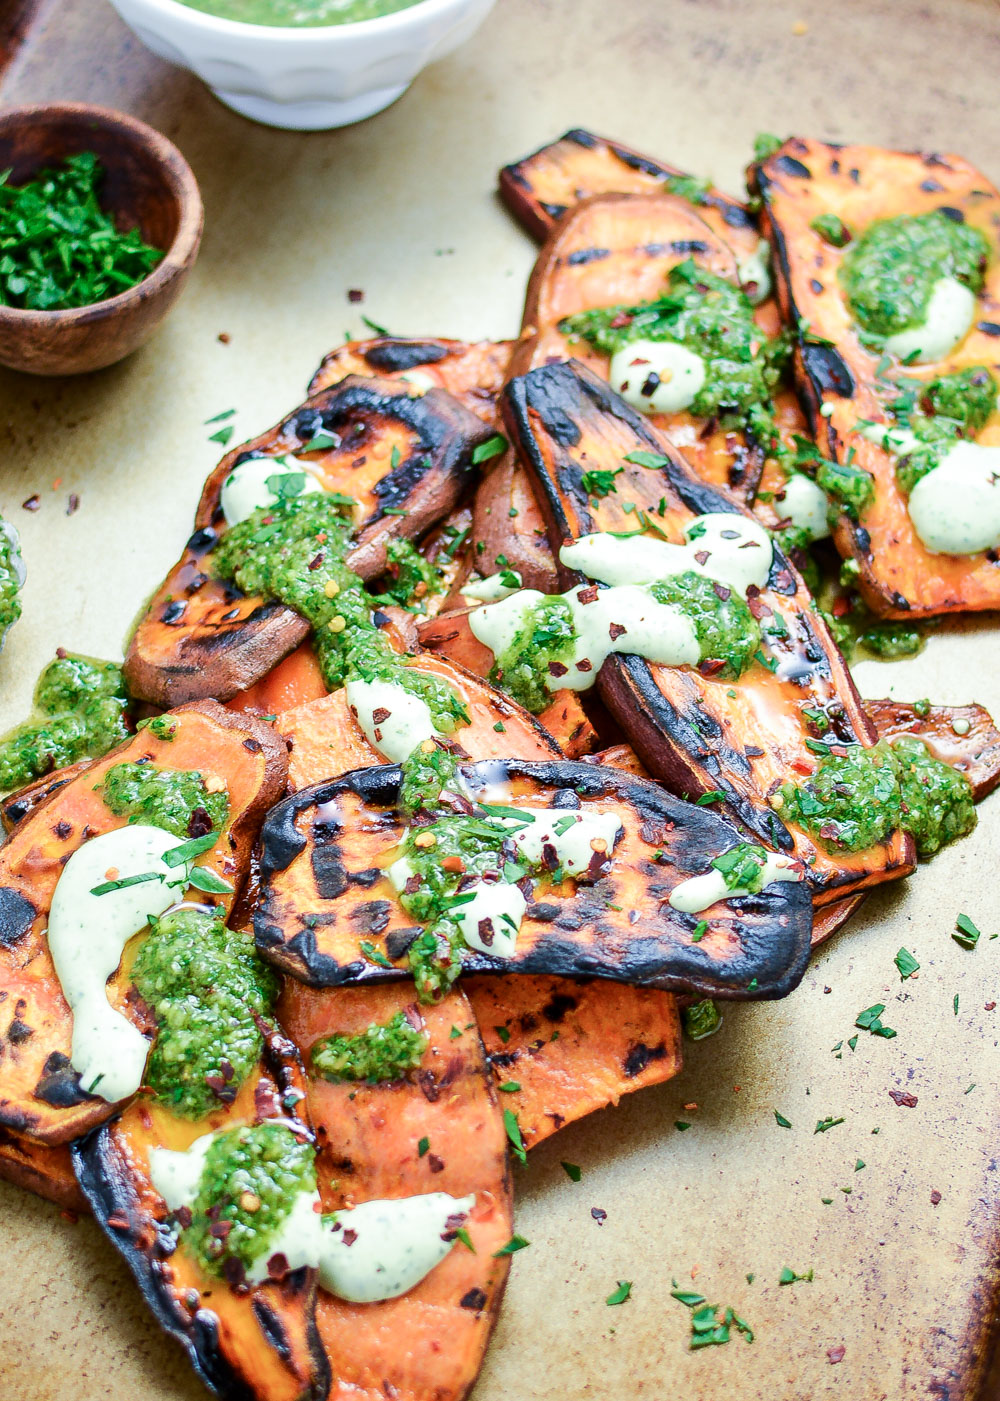 Grilled Sweet Potatoes with Cilantro Cream and Quick Chimichurri is the perfect side dish recipe to celebrate summer!